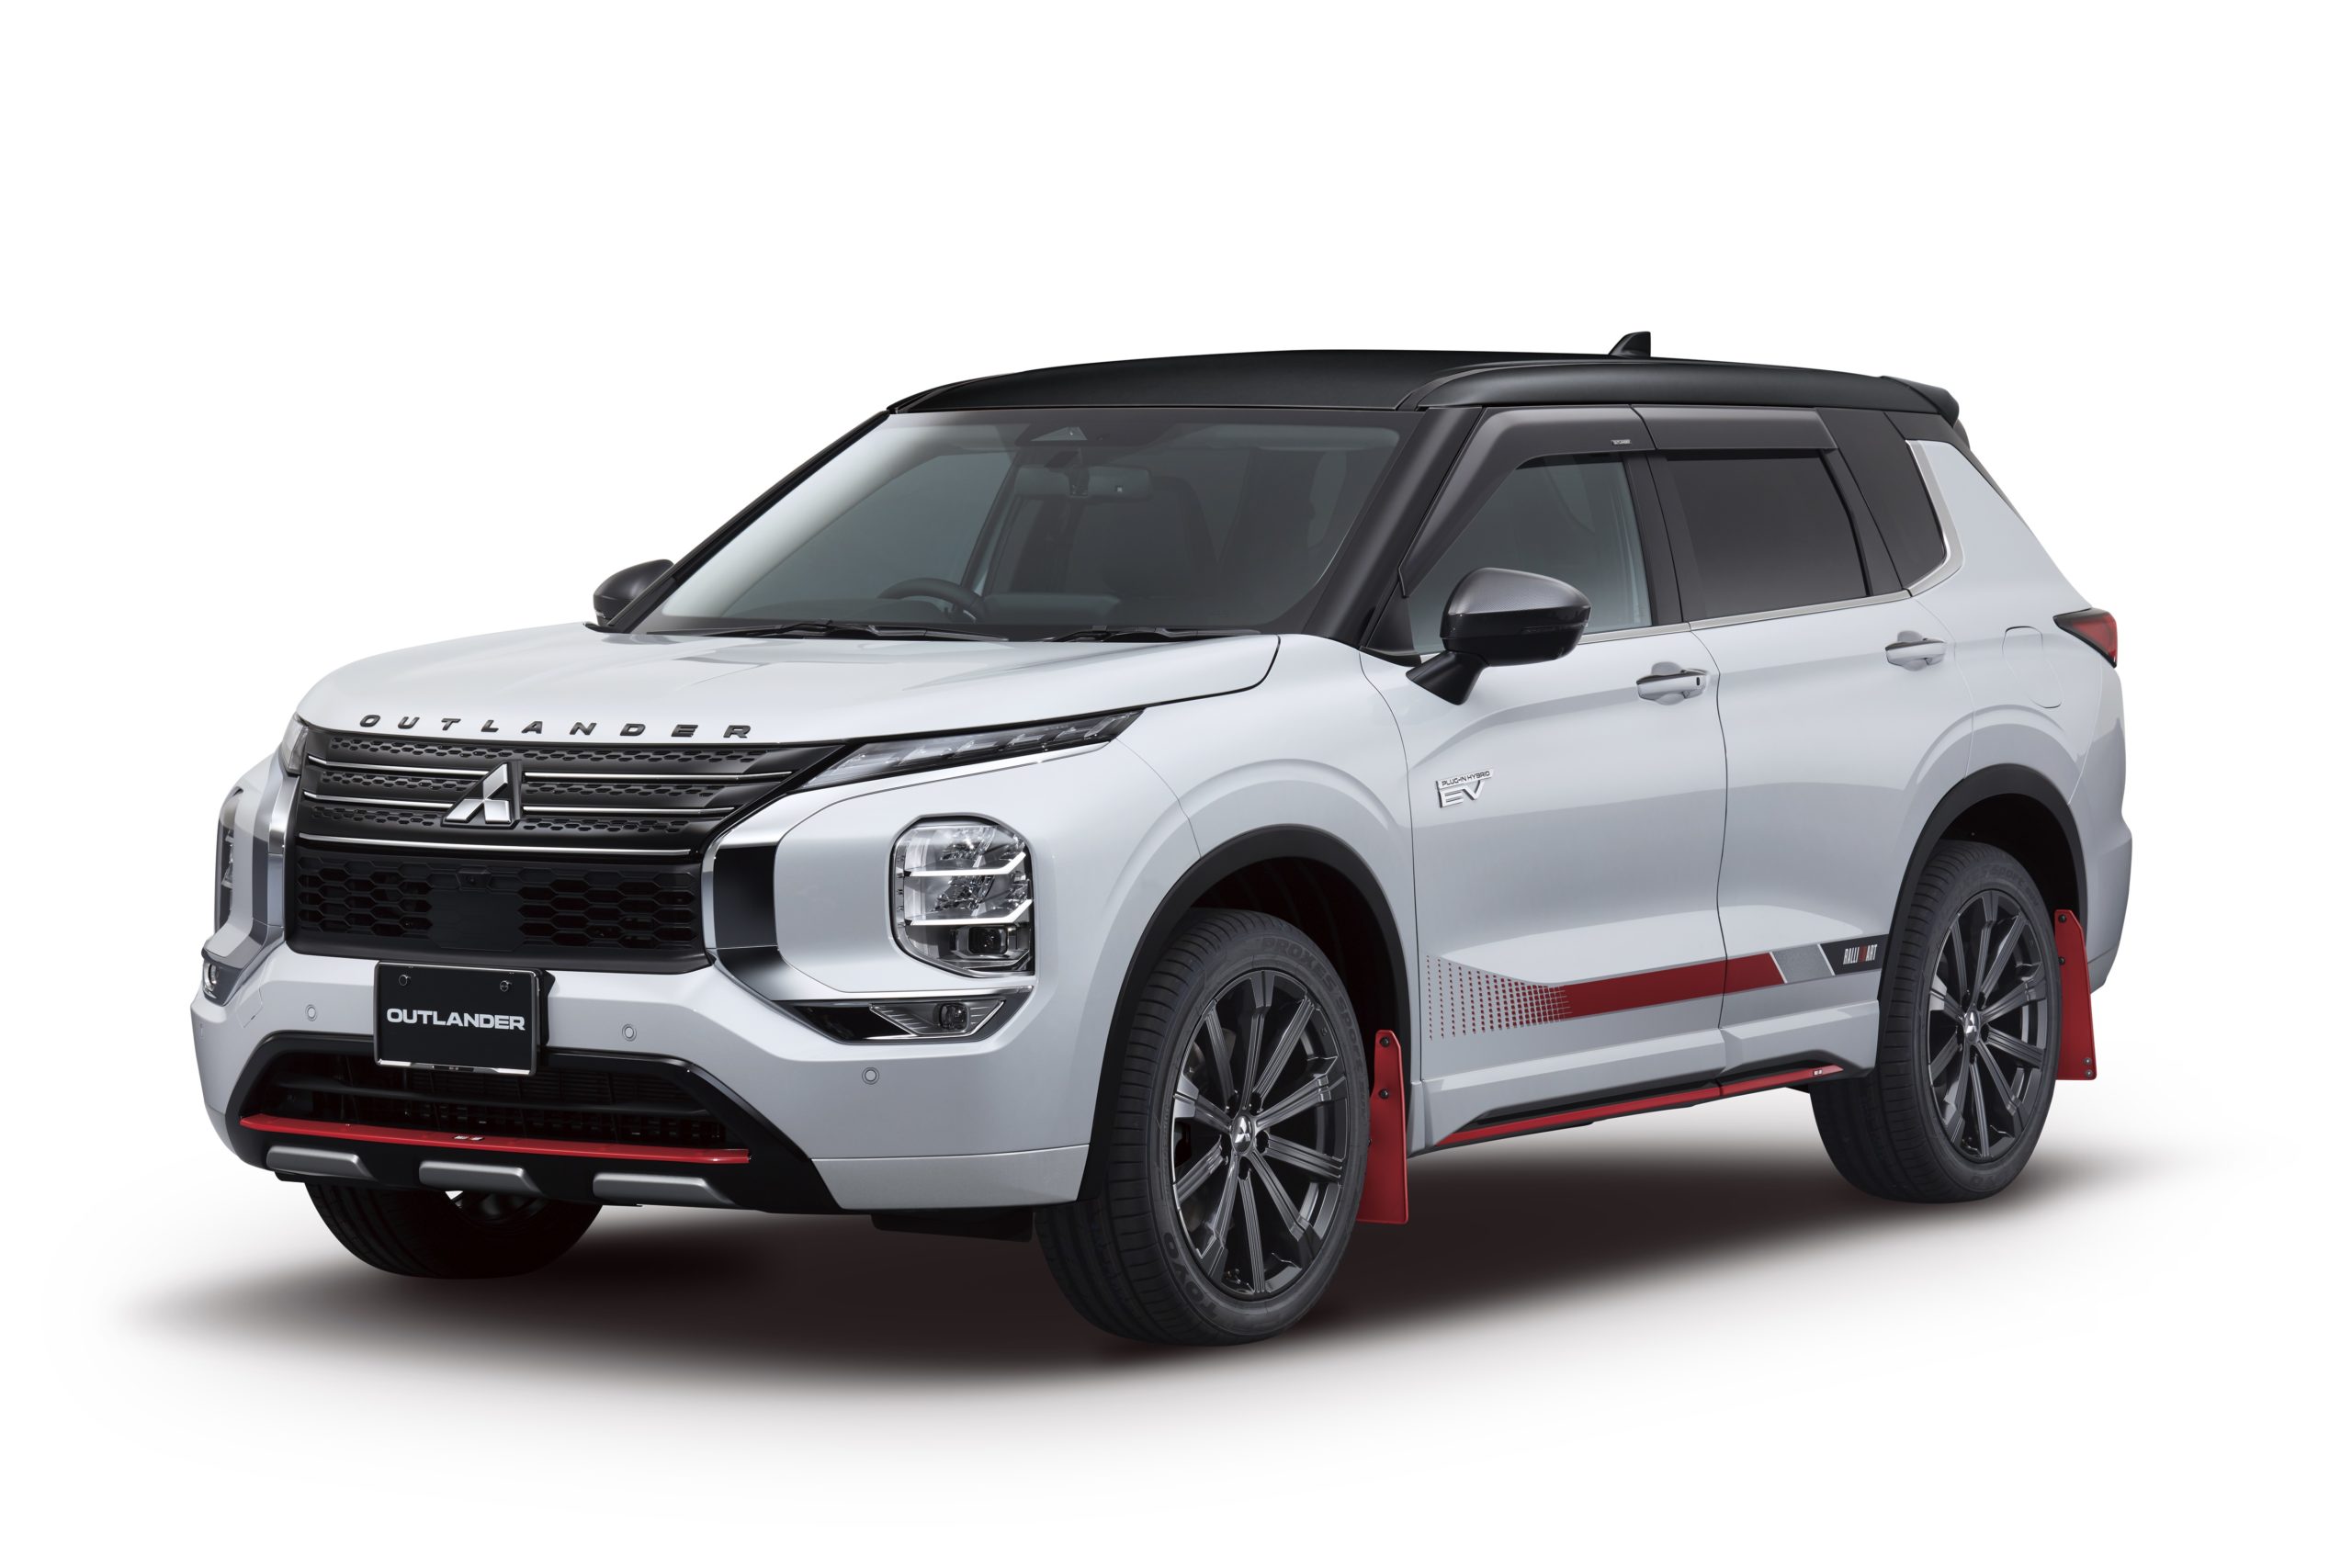 Mitsubishi unveils concept and relaunches Ralliart division TRACEDNEWS